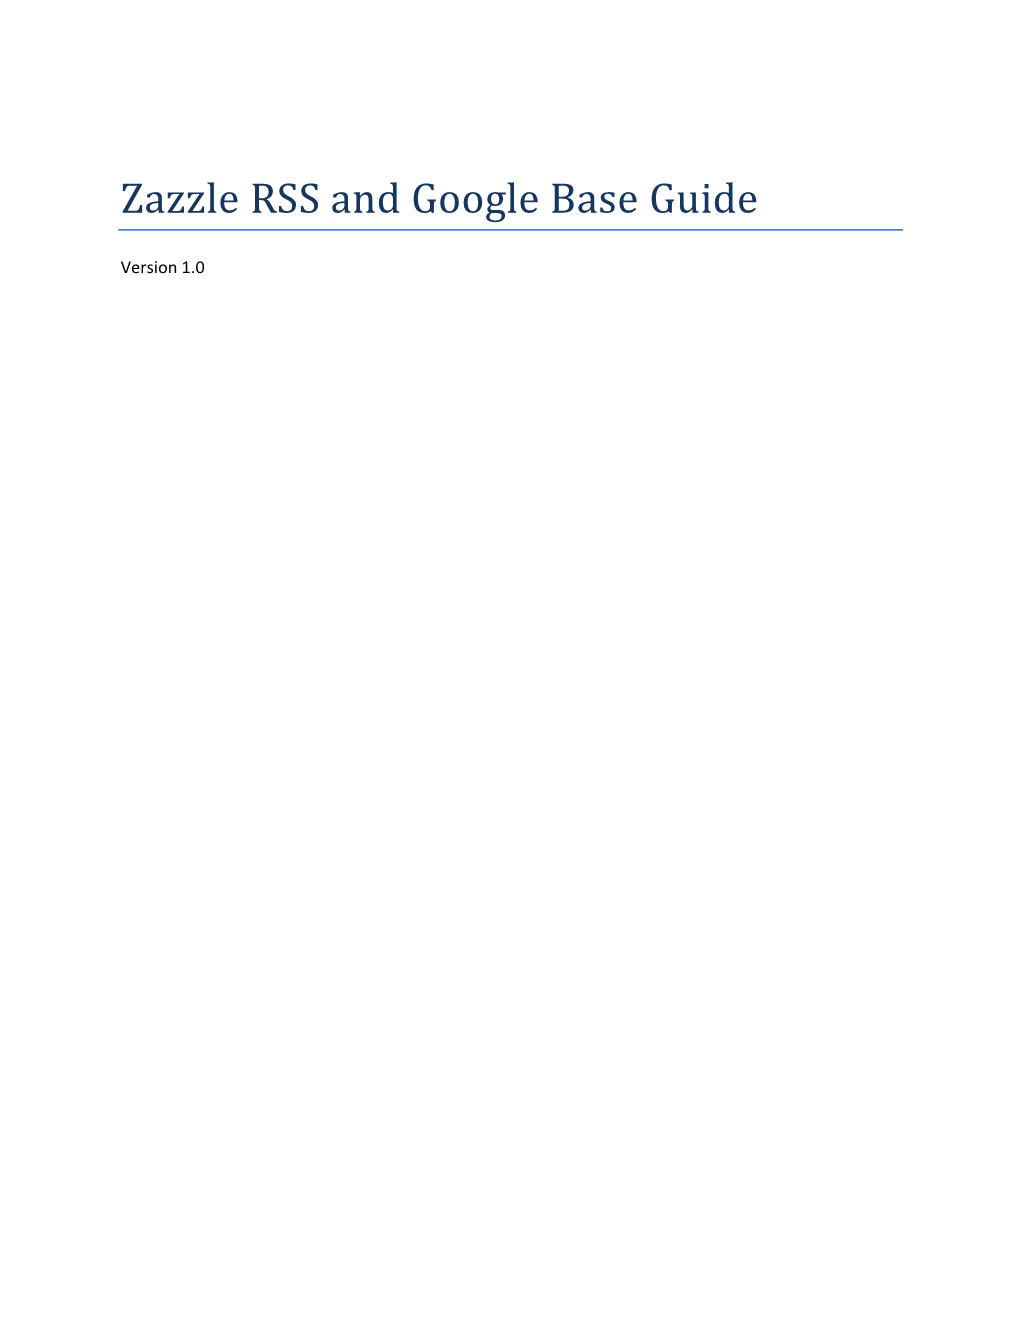 Zazzle RSS and Google Base Guide